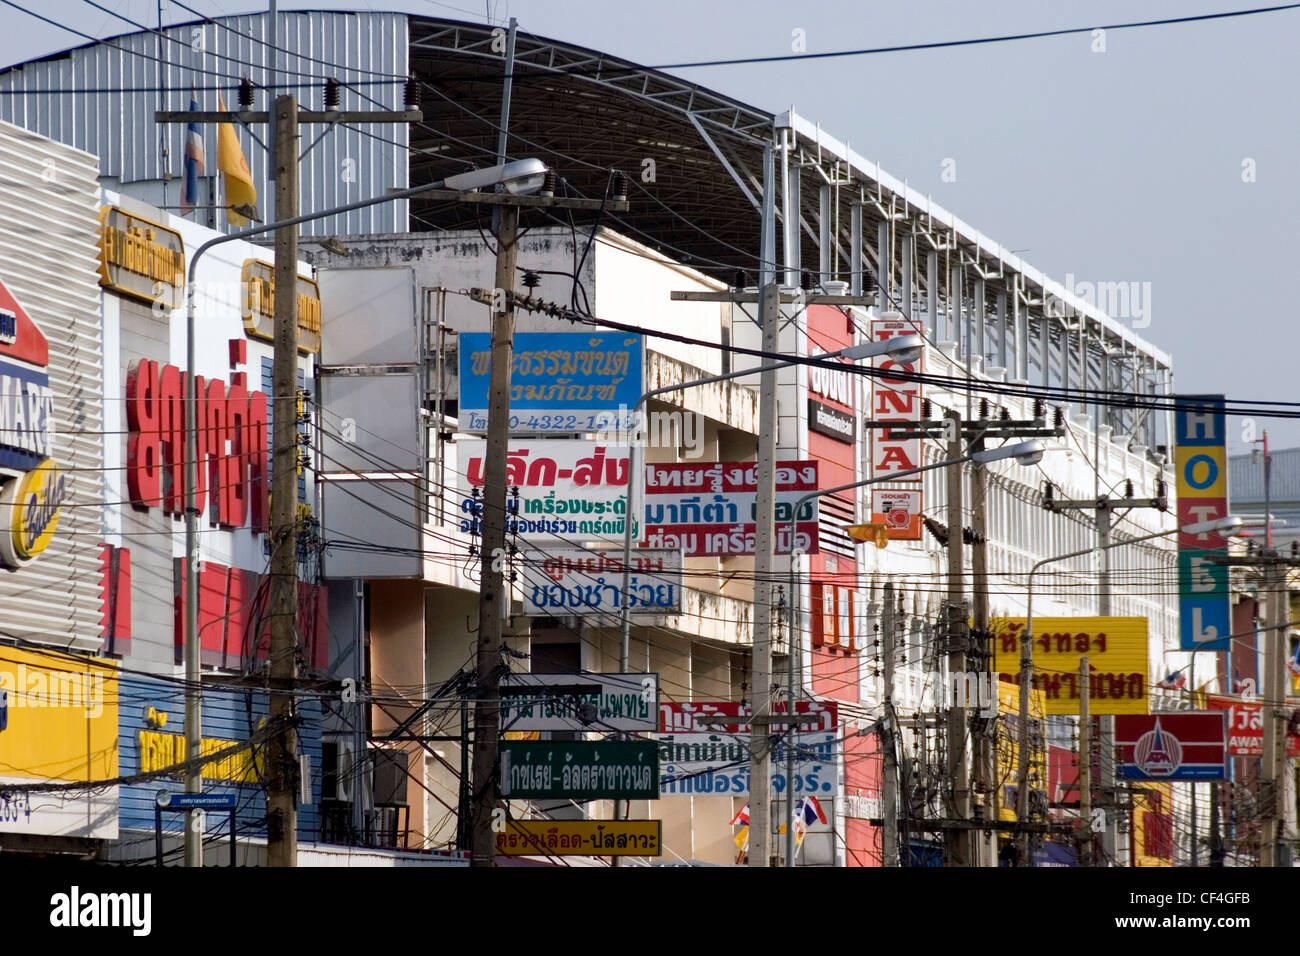 Many signs written in Thai are part of the urban landscape on a city street in urban Khon Kaen, Thailand. Stock Photo